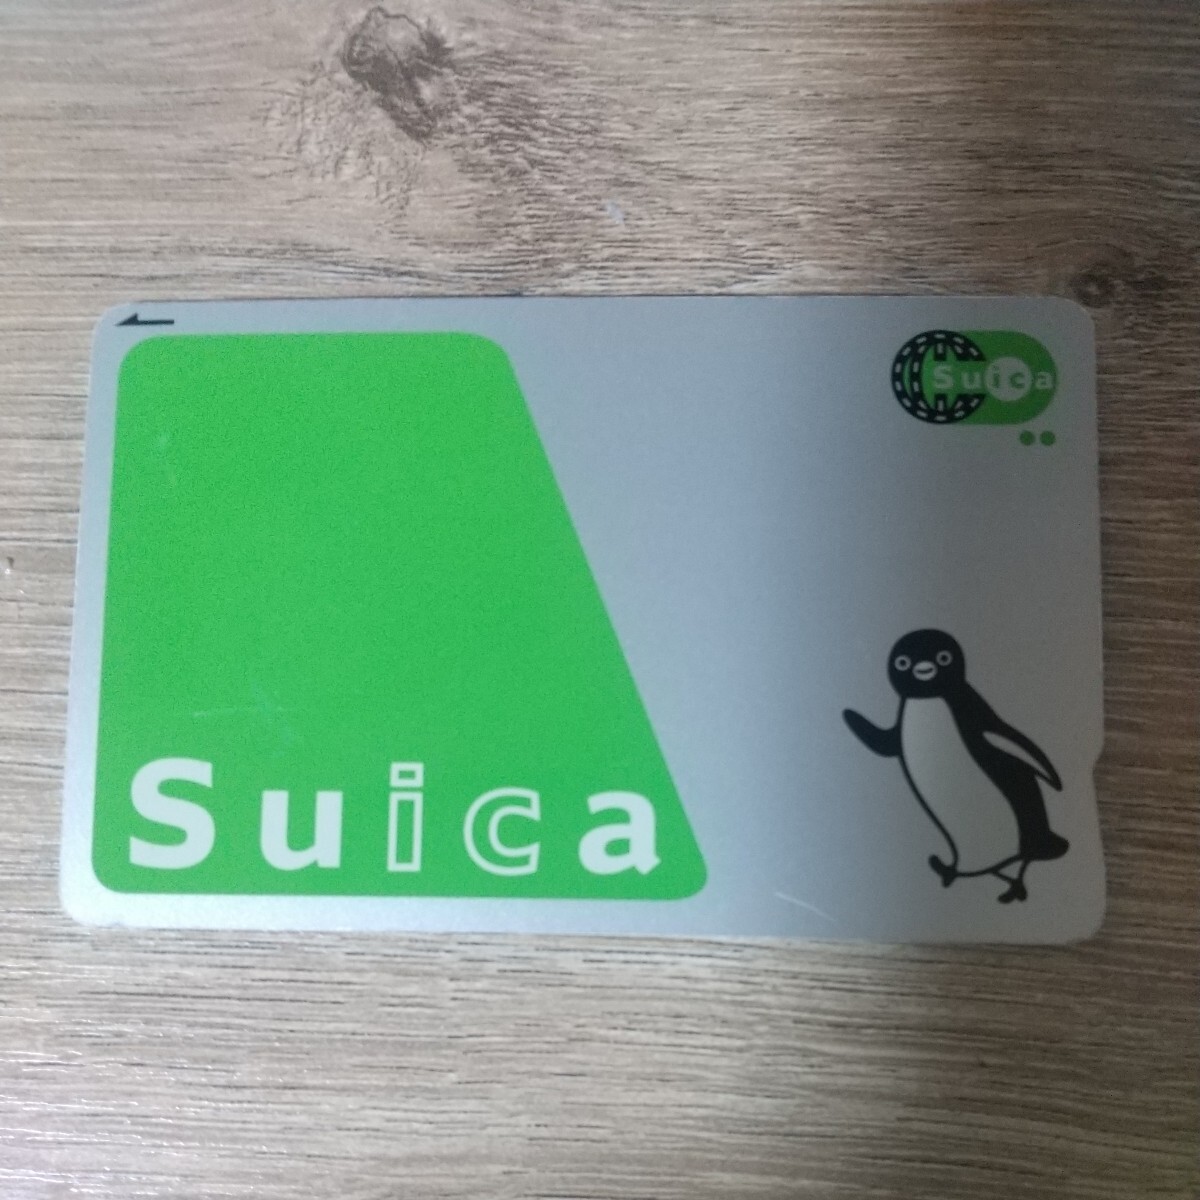  less chronicle name Suica( Charge remainder height 0 jpy )